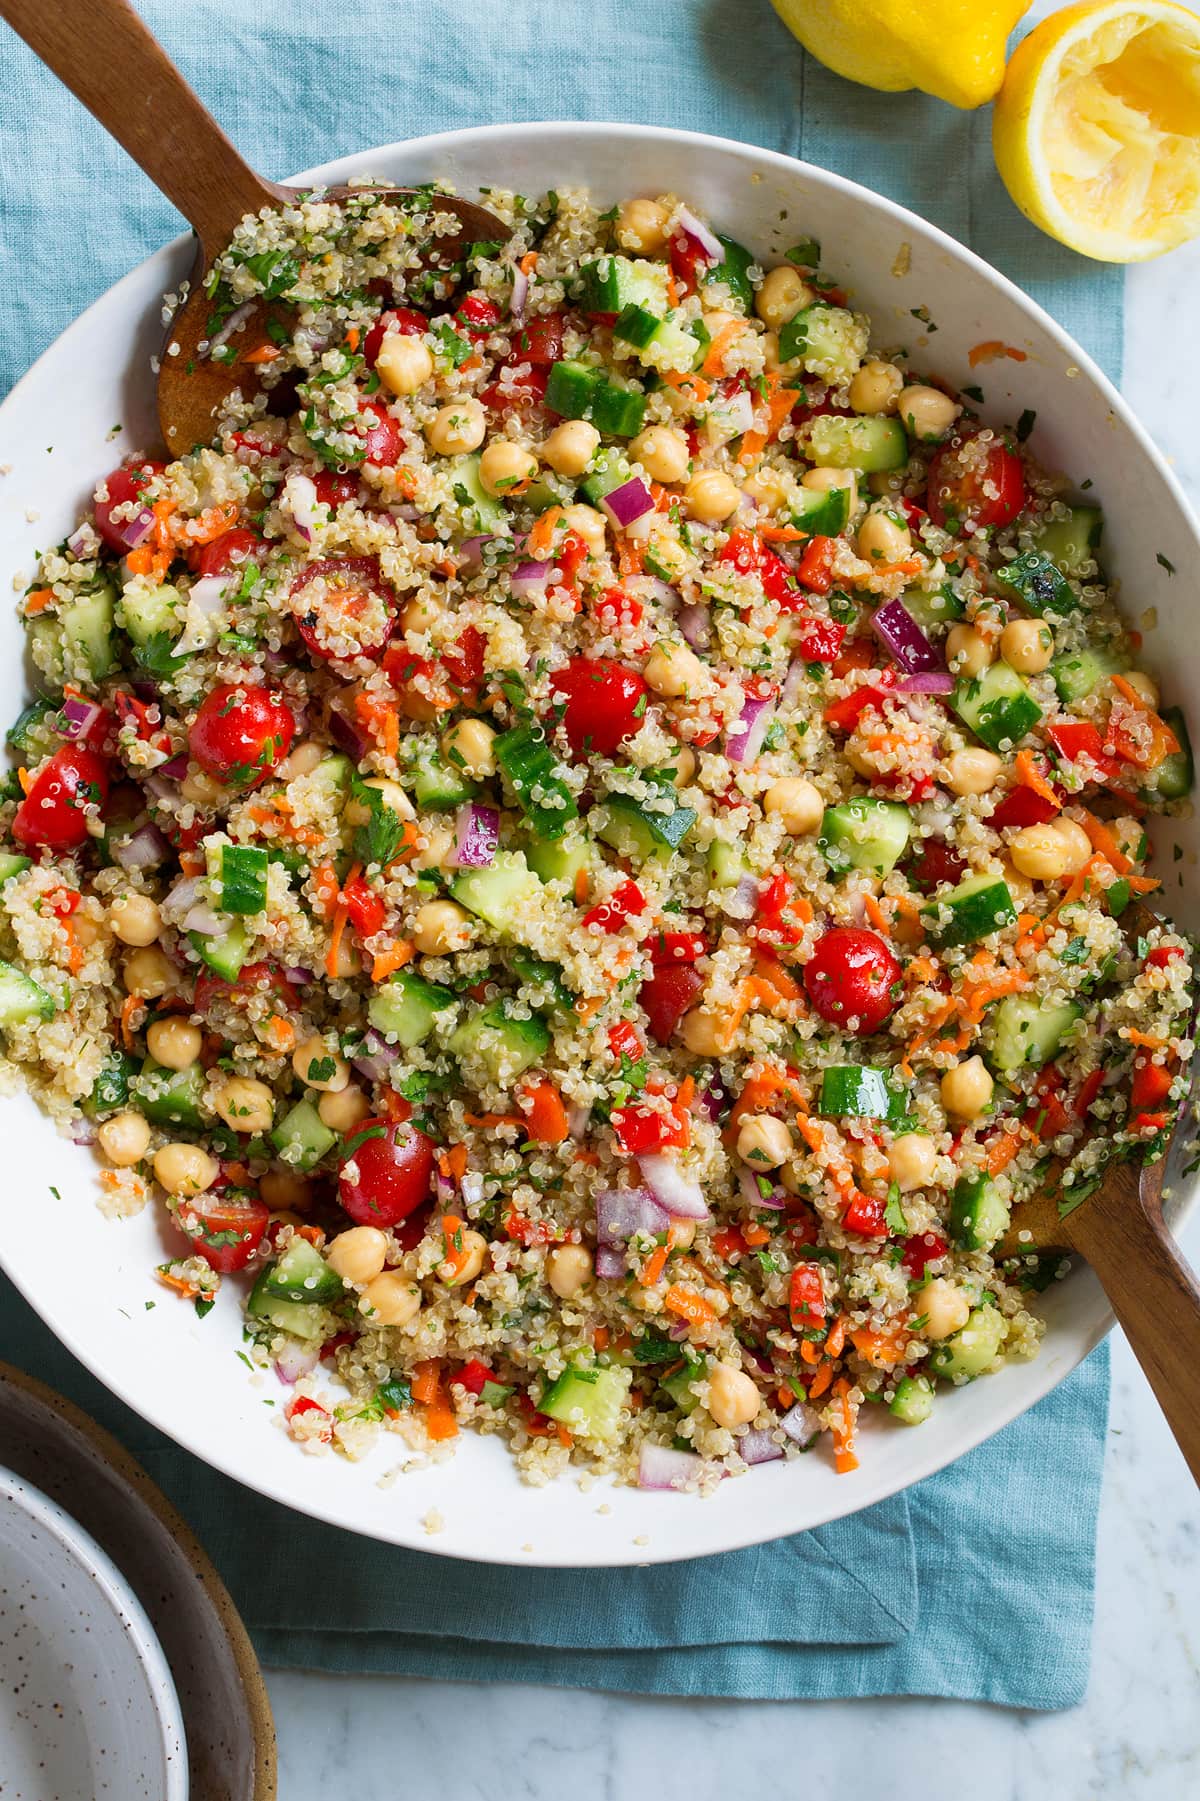 I. Introduction to Quinoa Salads and Bowls